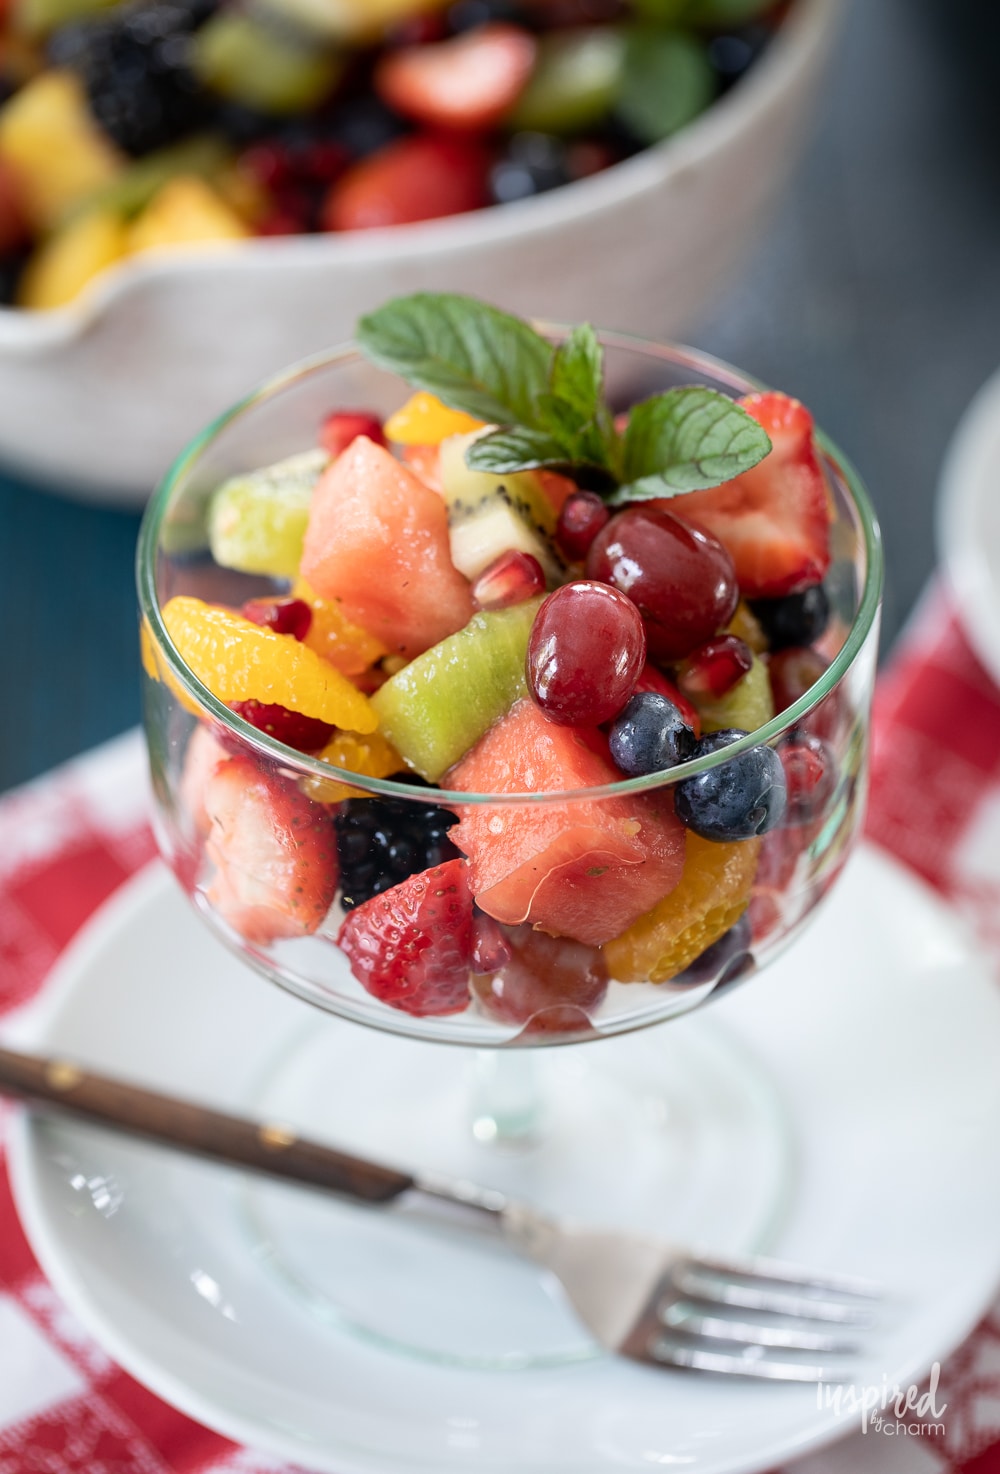 up close photo of fruit salad in a clear glass serving dish.